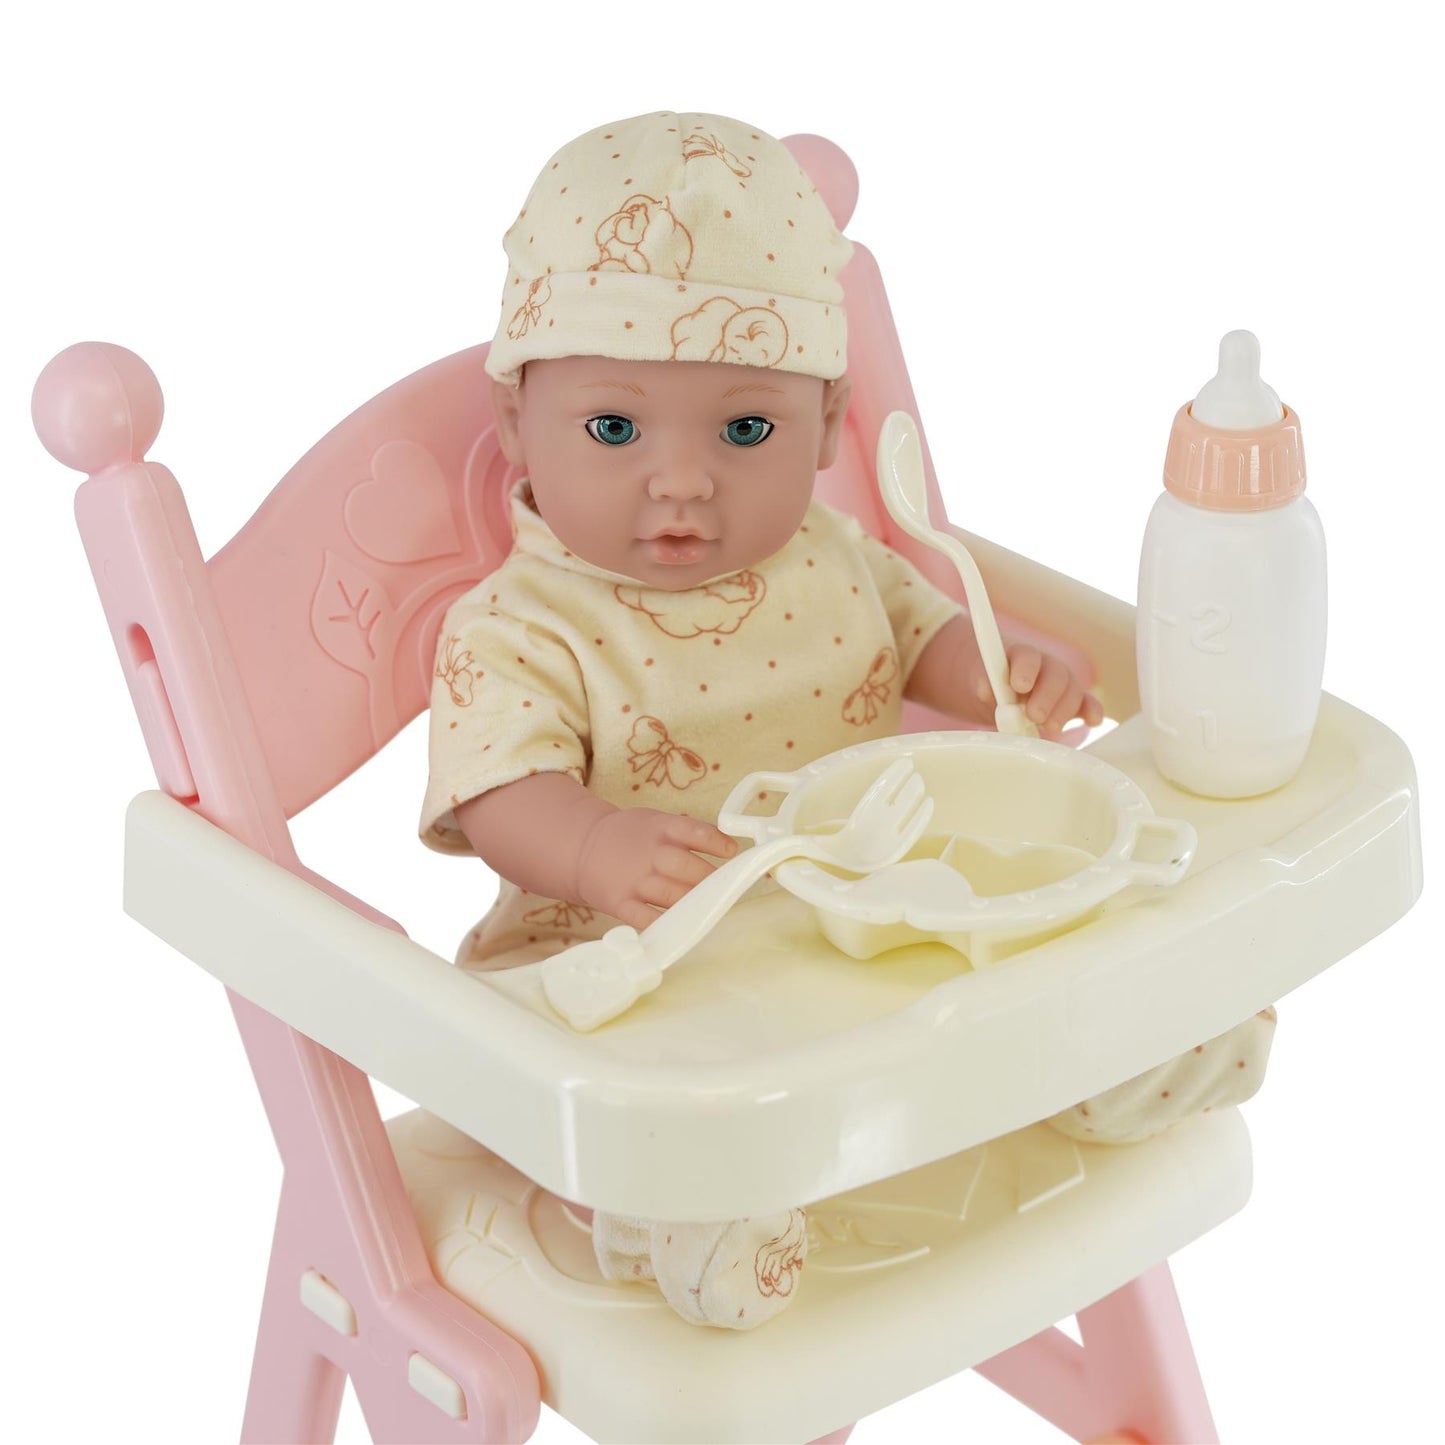 Baby Doll with Feeding High Chair & Accessories by BiBi Doll - UKBuyZone